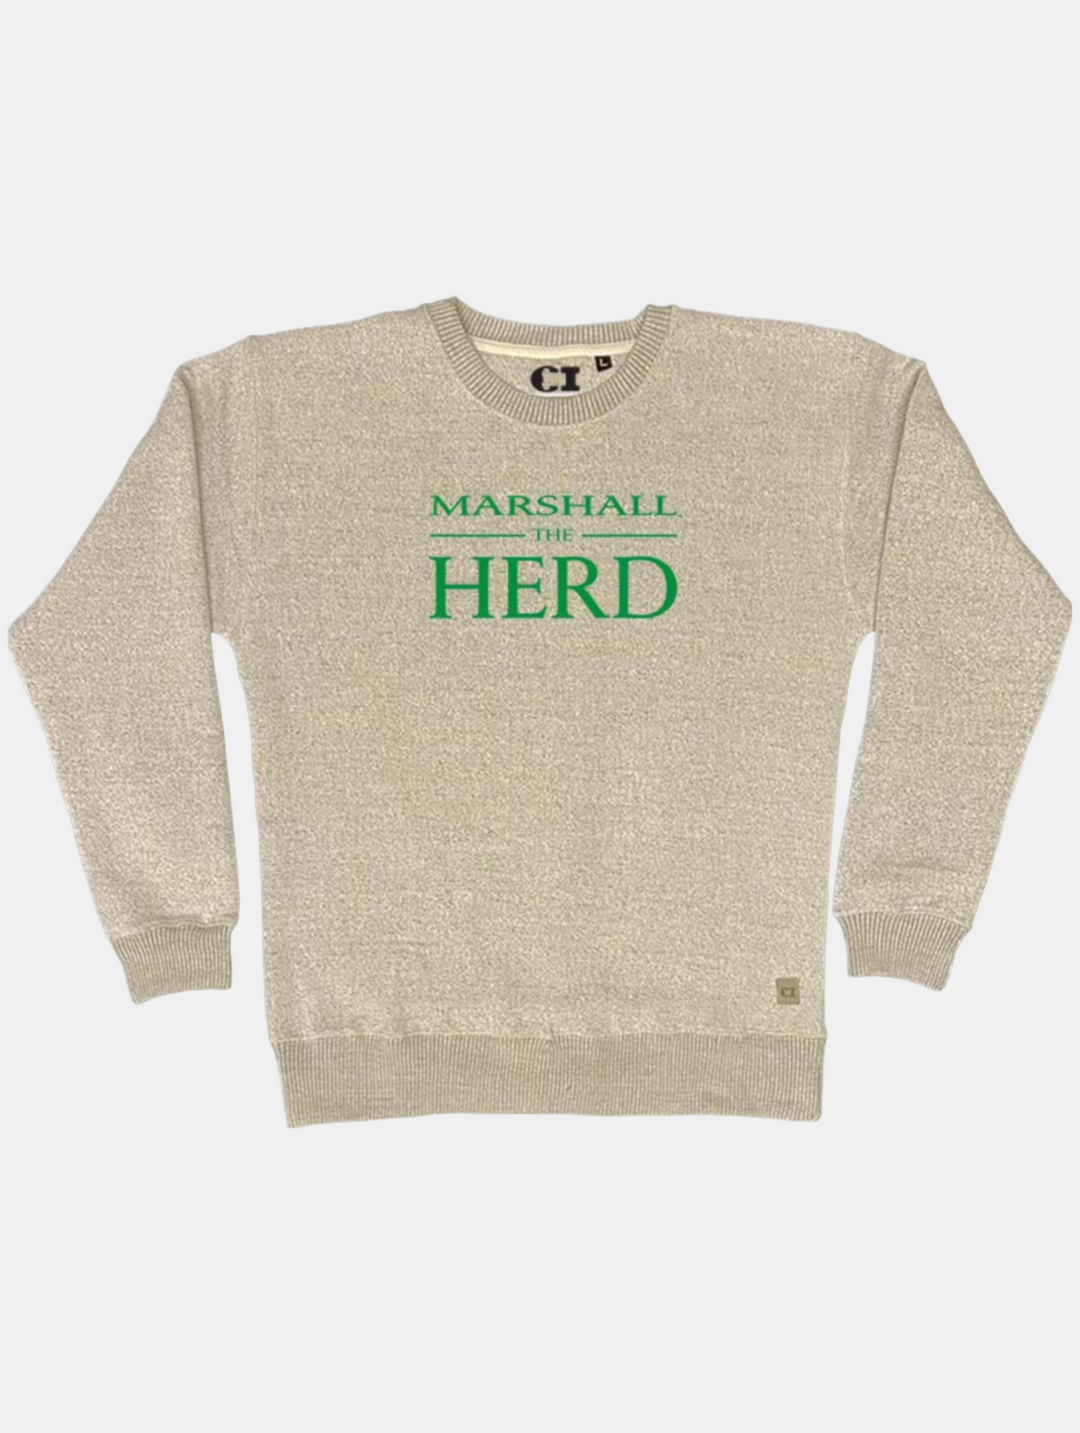 an oatmeal color sweater/sweatshirt with Marshall the Herd on the front